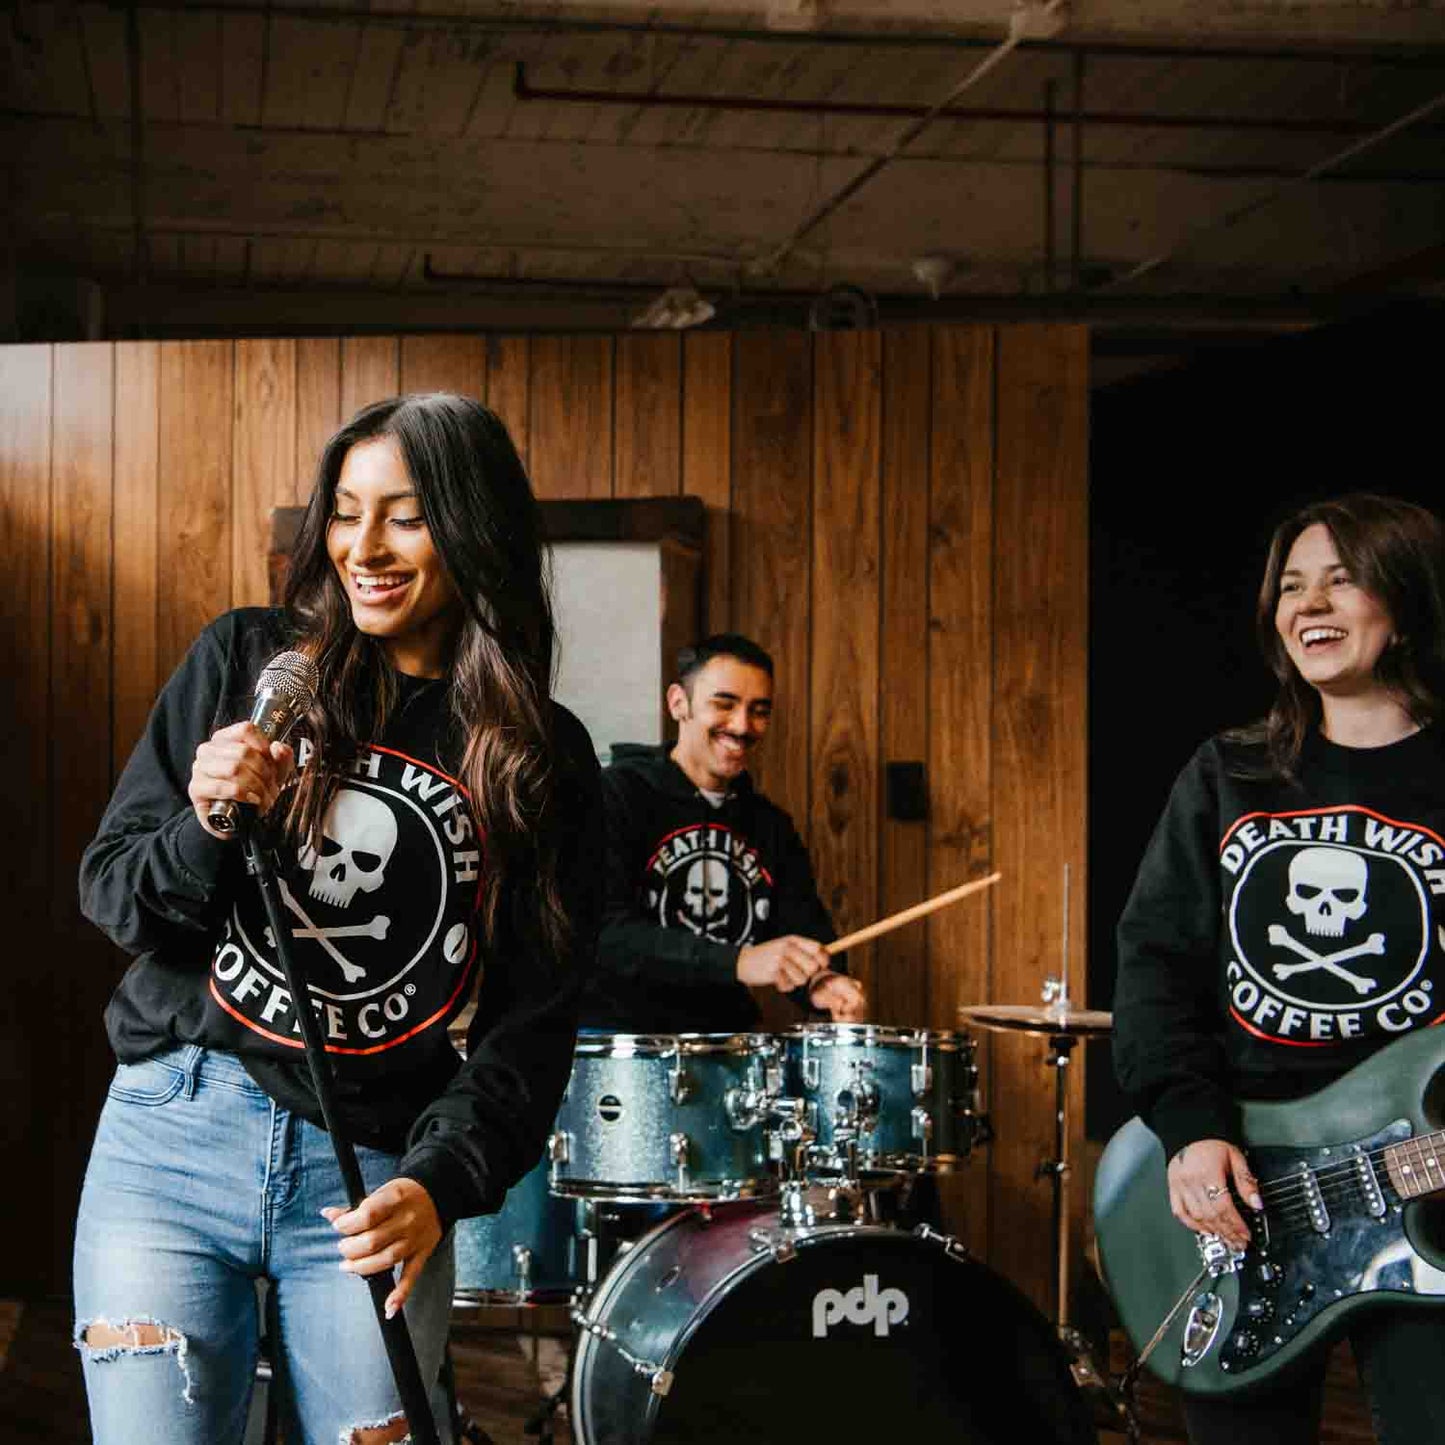 Singing at band practice in the Death Wish Coffee Classic Long Sleeve Shirt.